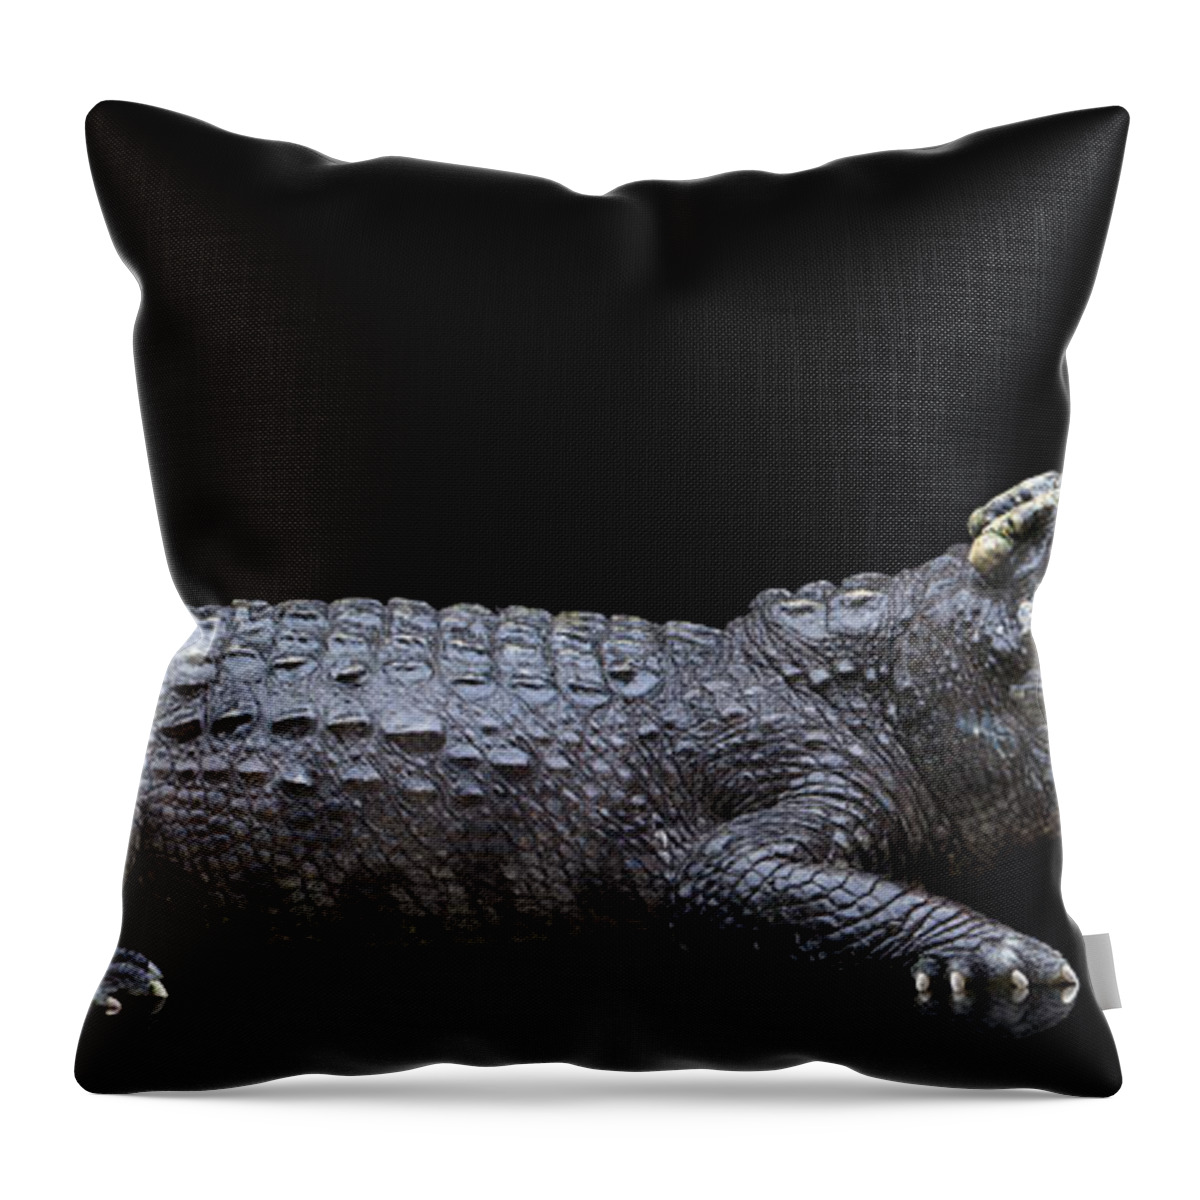 Risk Throw Pillow featuring the photograph Studio Photos Of Crocodiles Profile On by John Lund